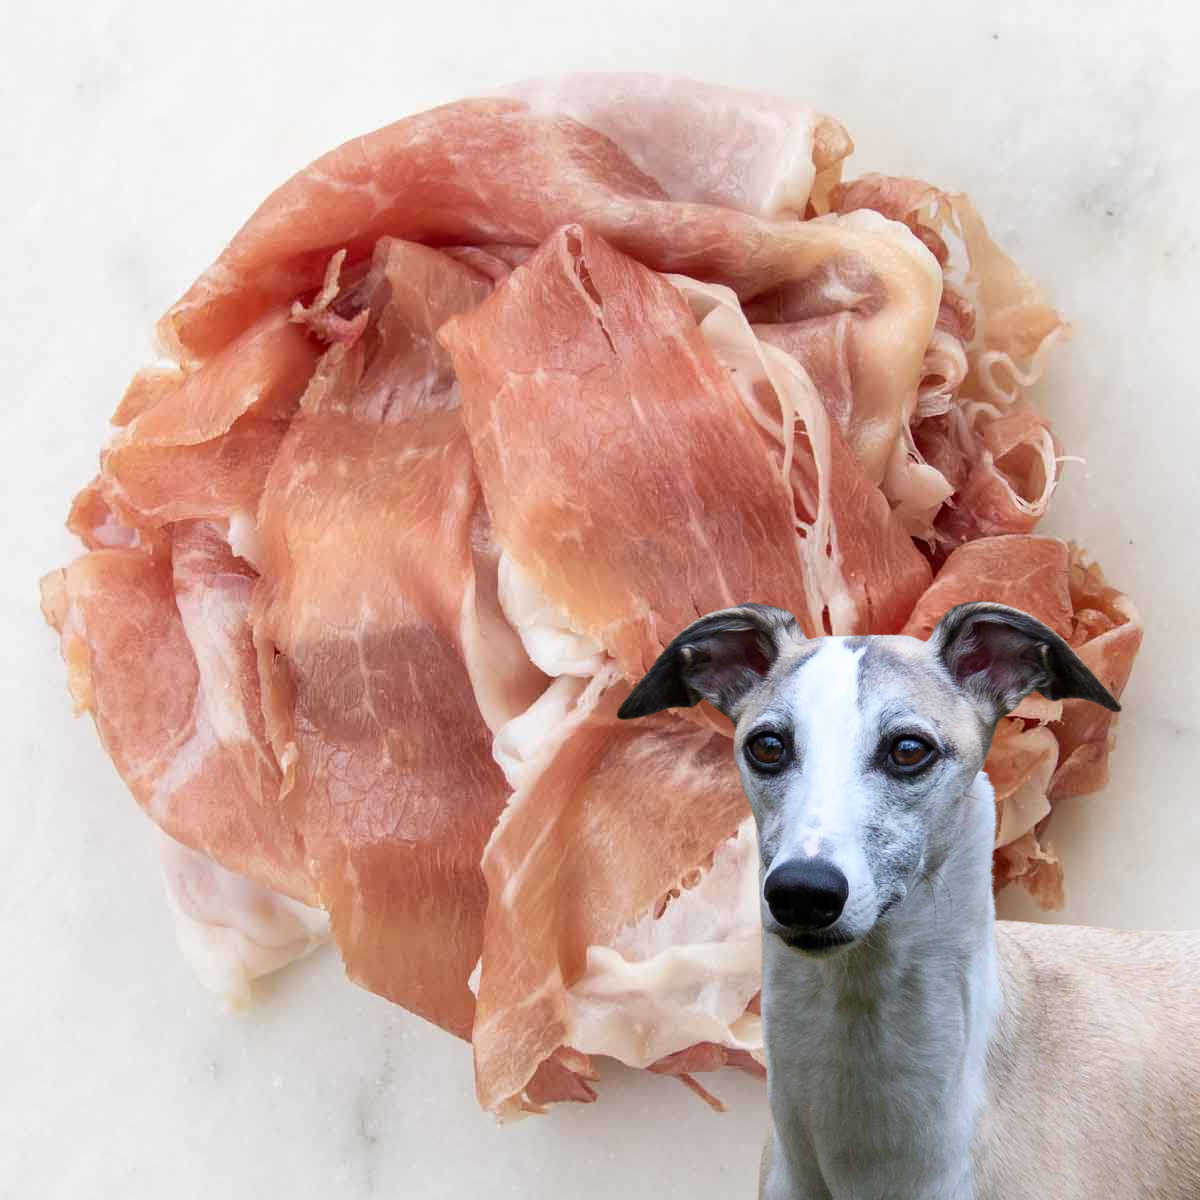 a dog in front of some prosciutto.